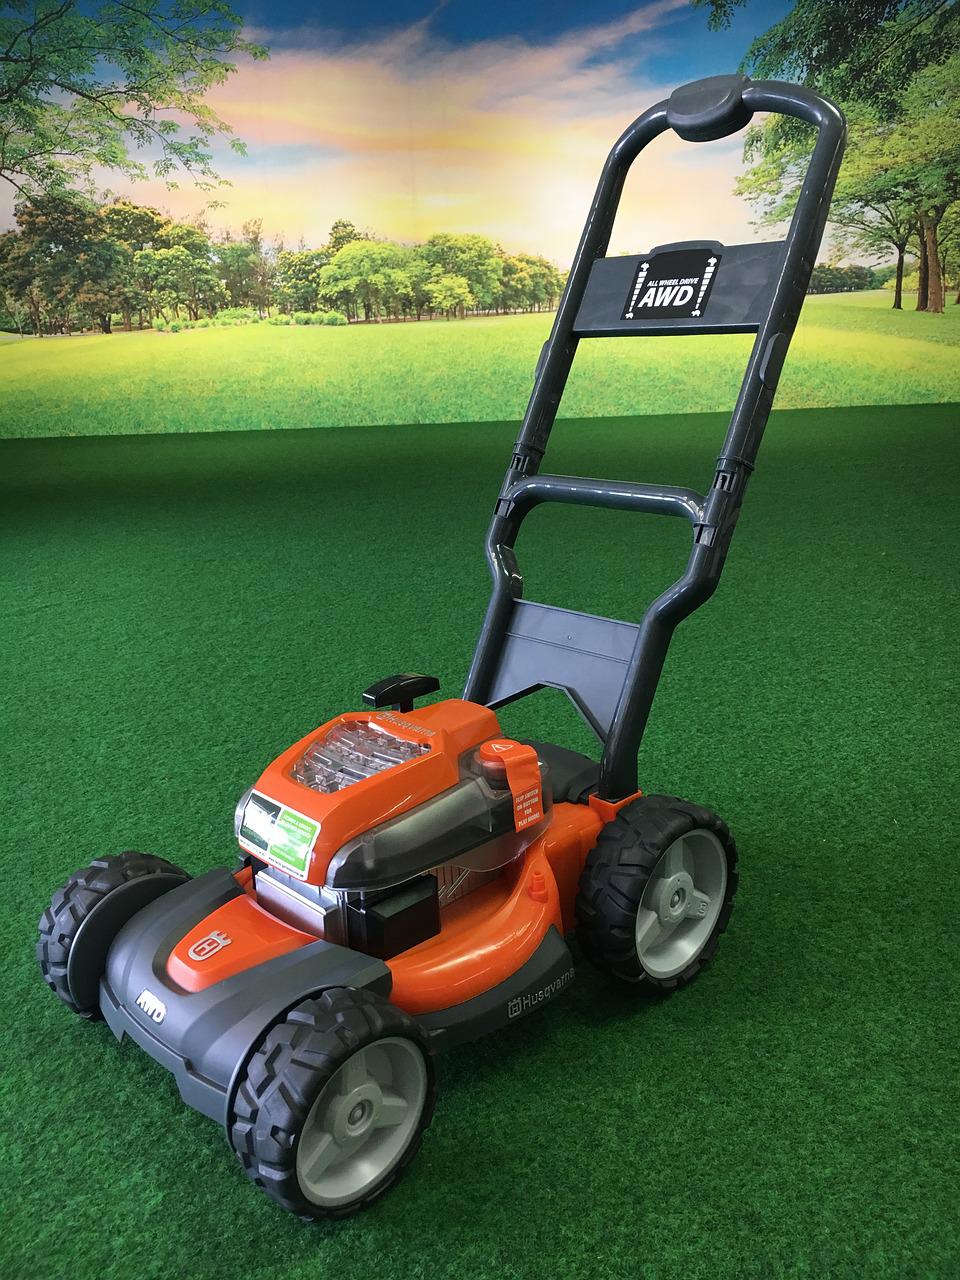 The Top Five Reasons to Buy a Husqvarna Lawn Mower